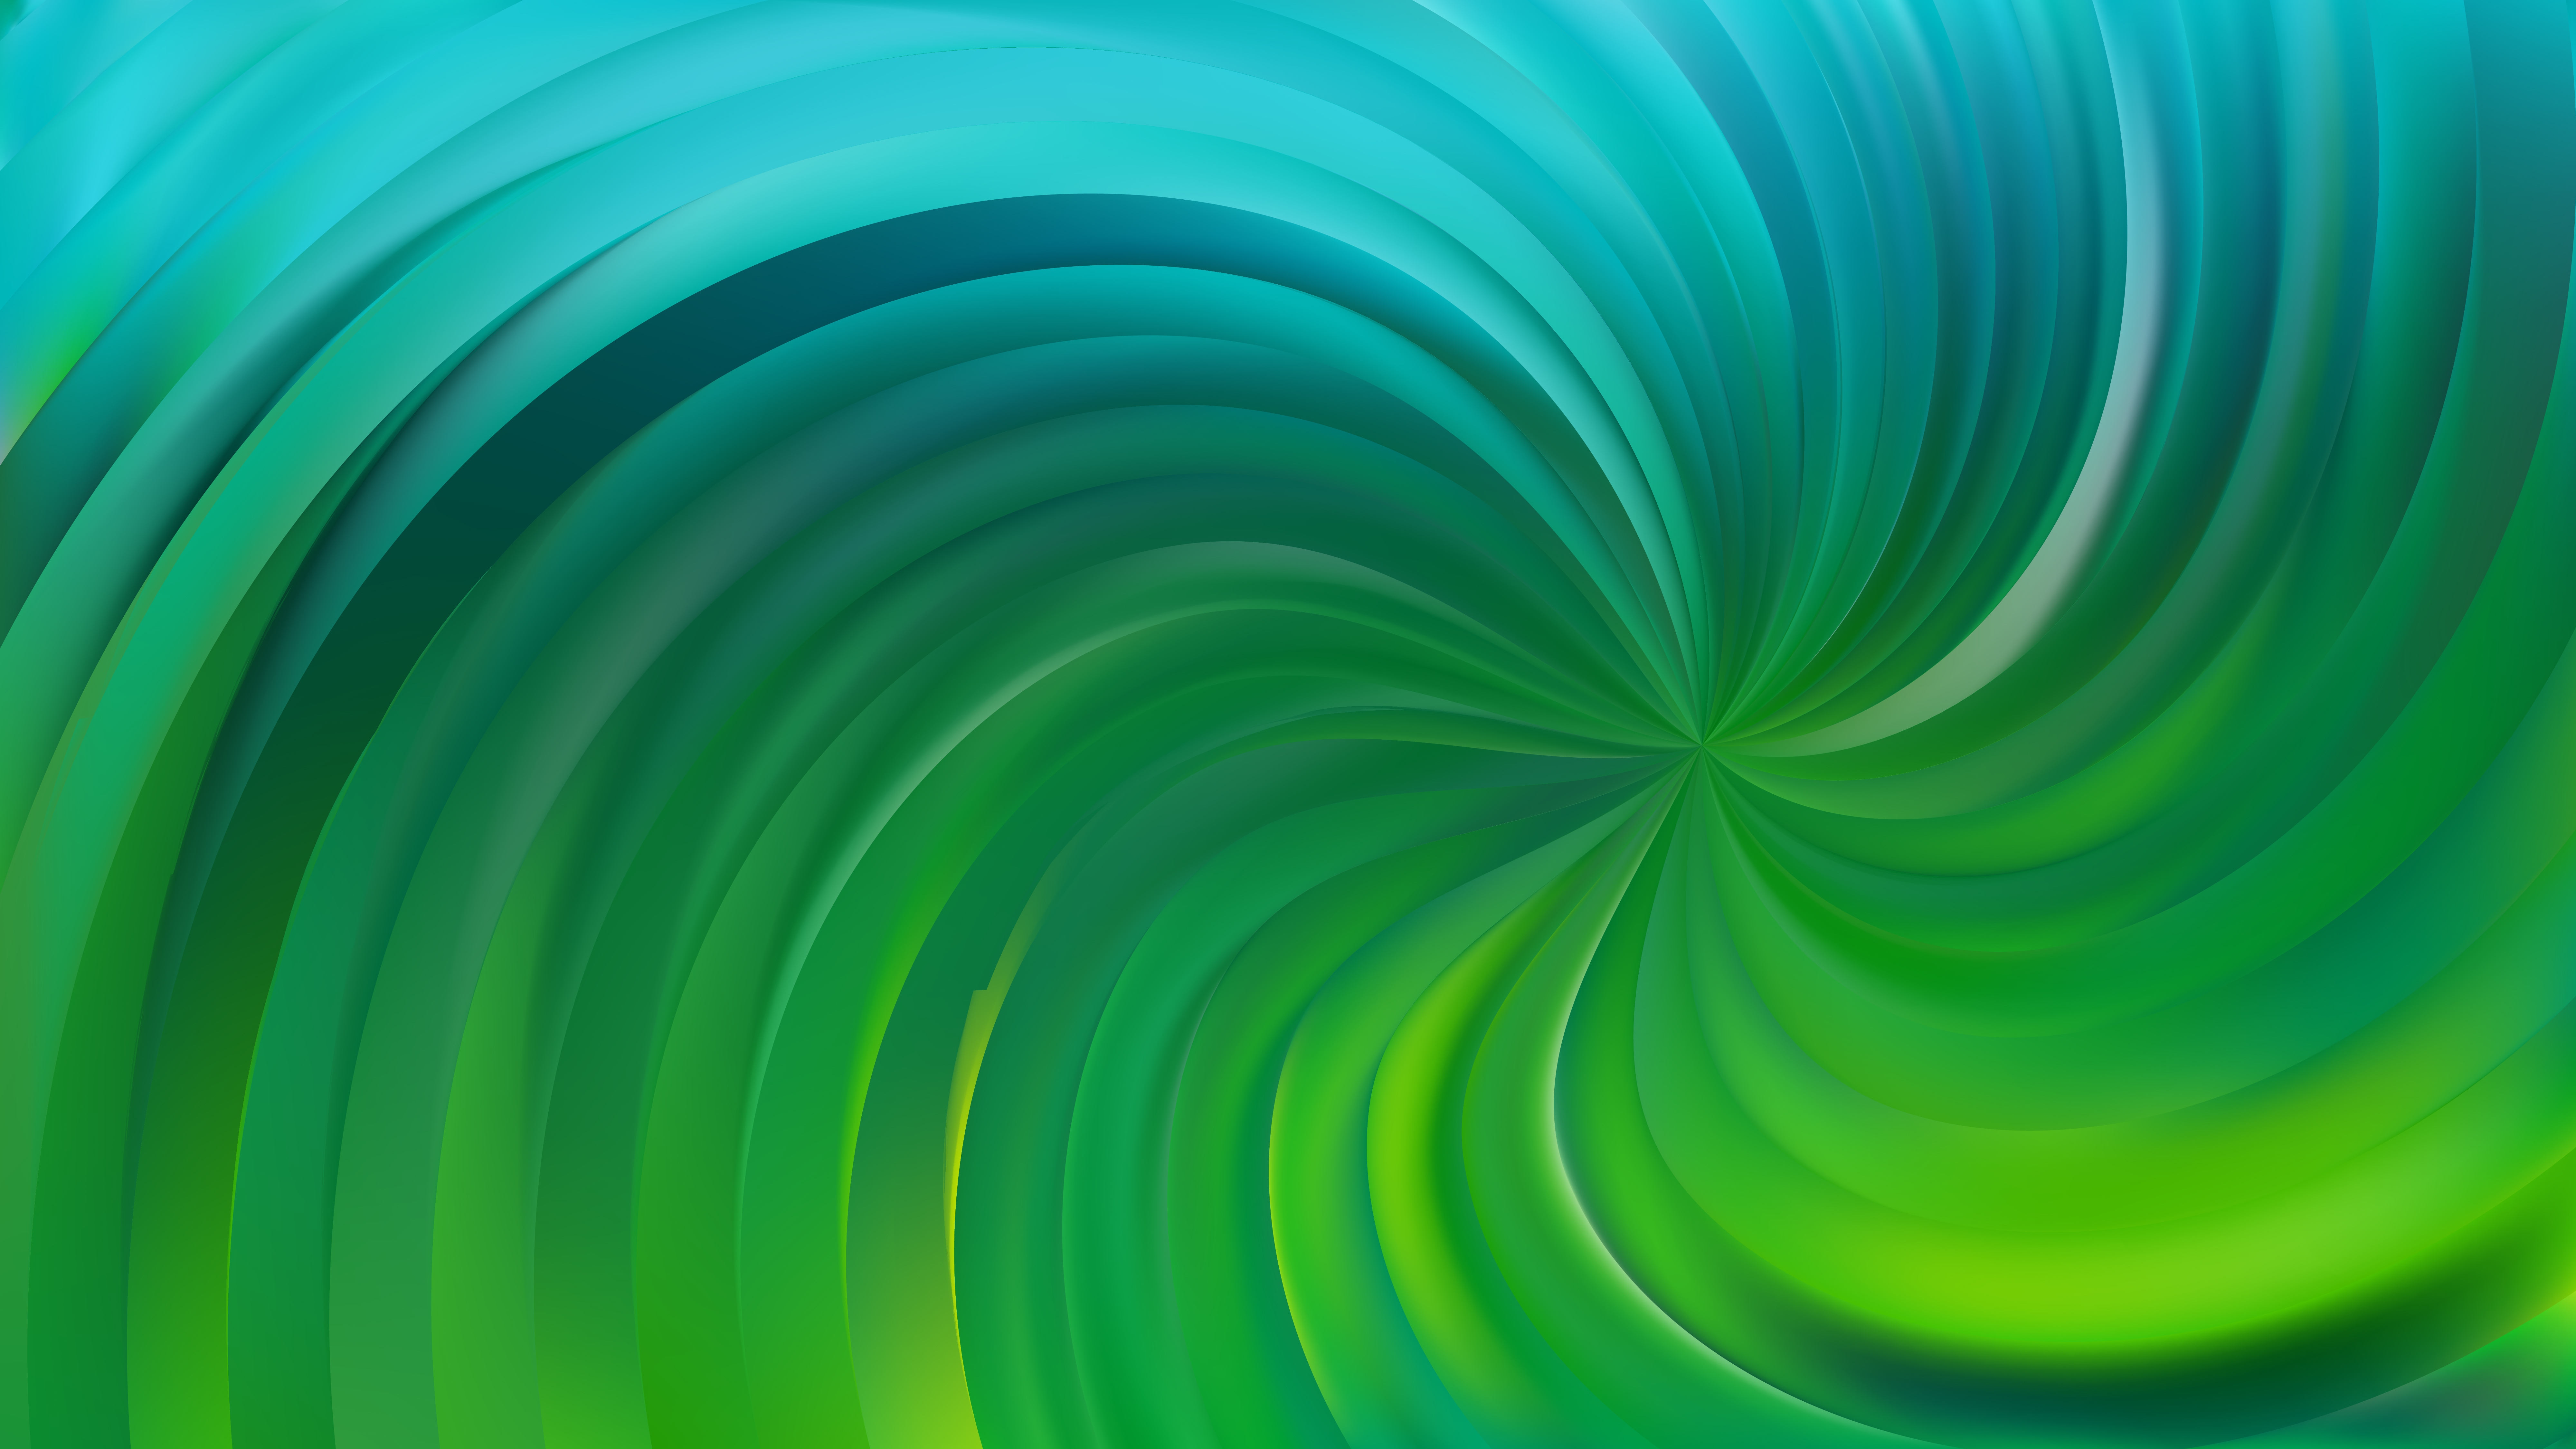 Free Abstract Blue and Green Swirl Background